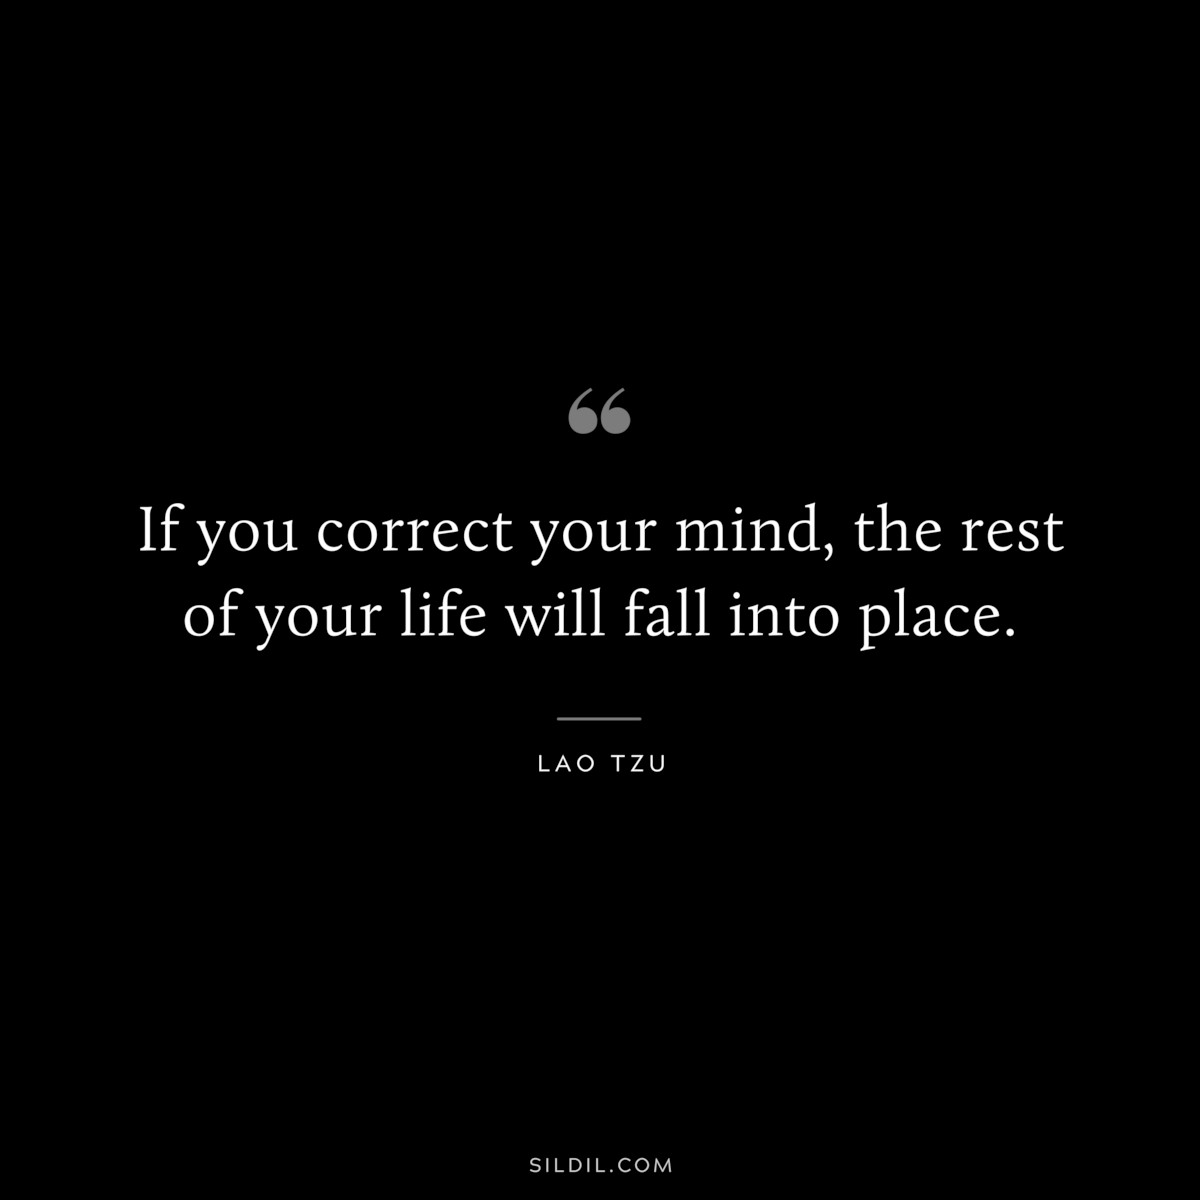 If you correct your mind, the rest of your life will fall into place. ― Lao Tzu